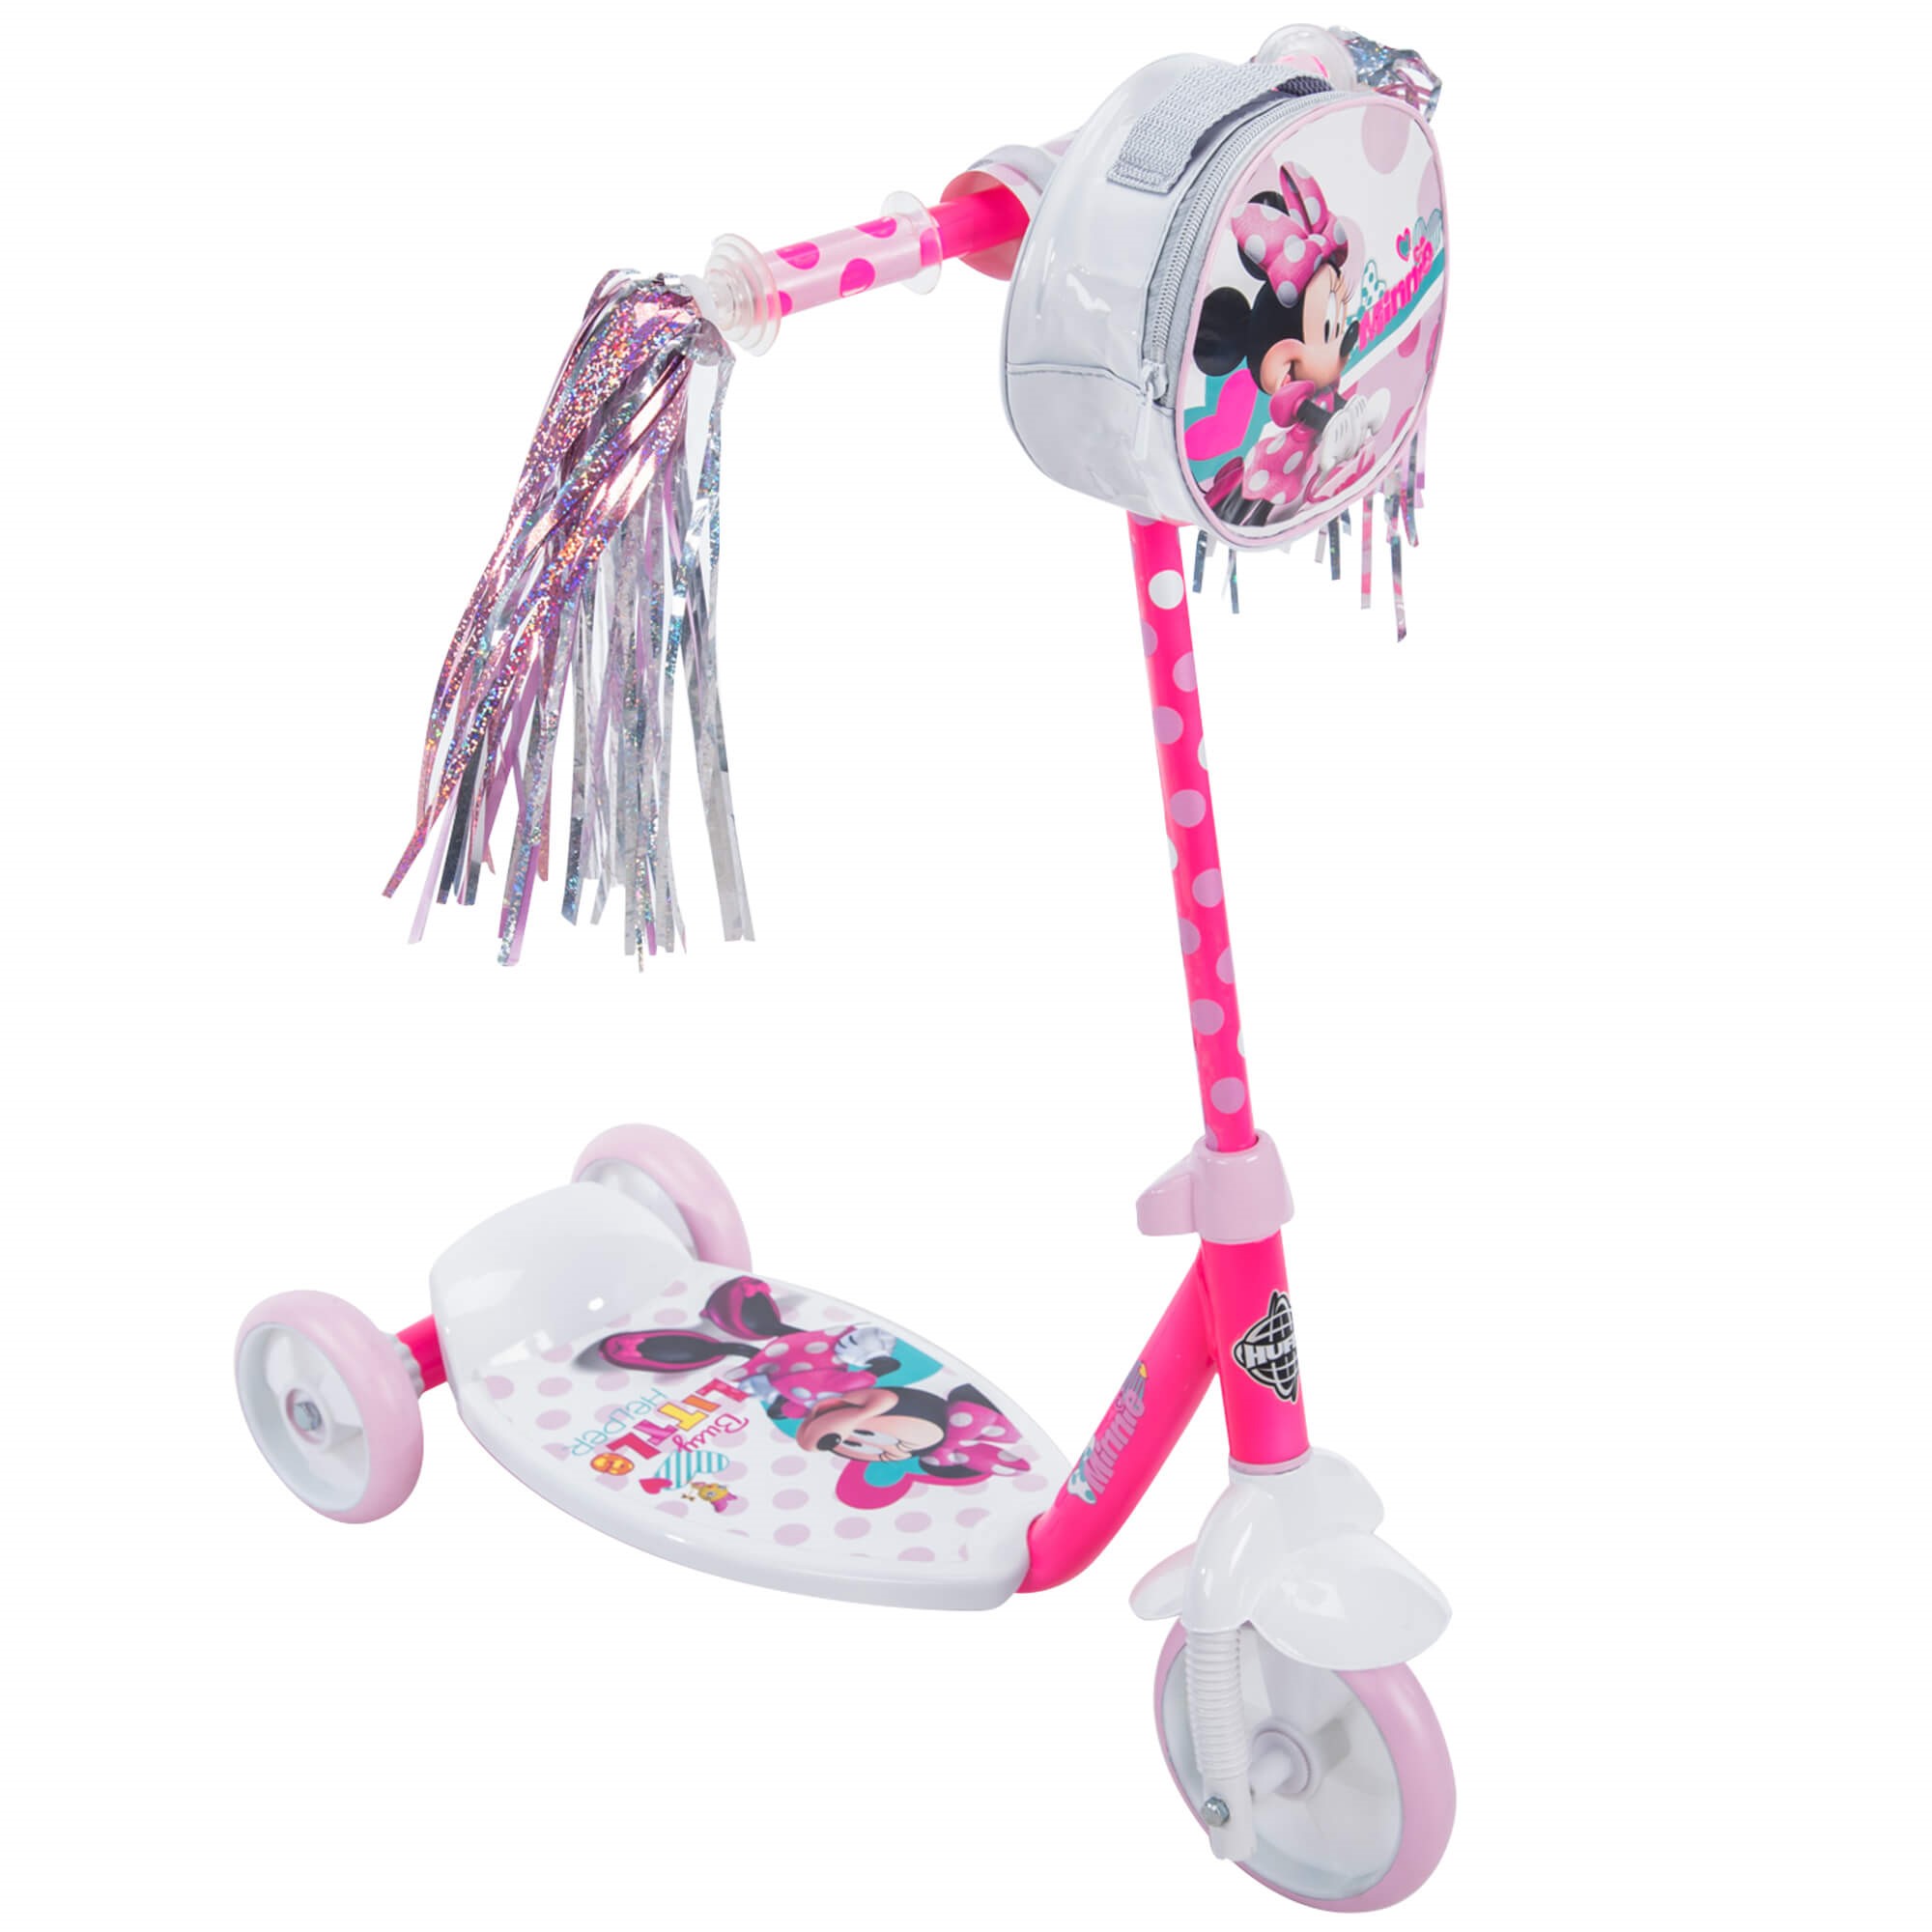 Disney Minnie Girls' 3-Wheel Pink Scooter, by Huffy - image 1 of 3